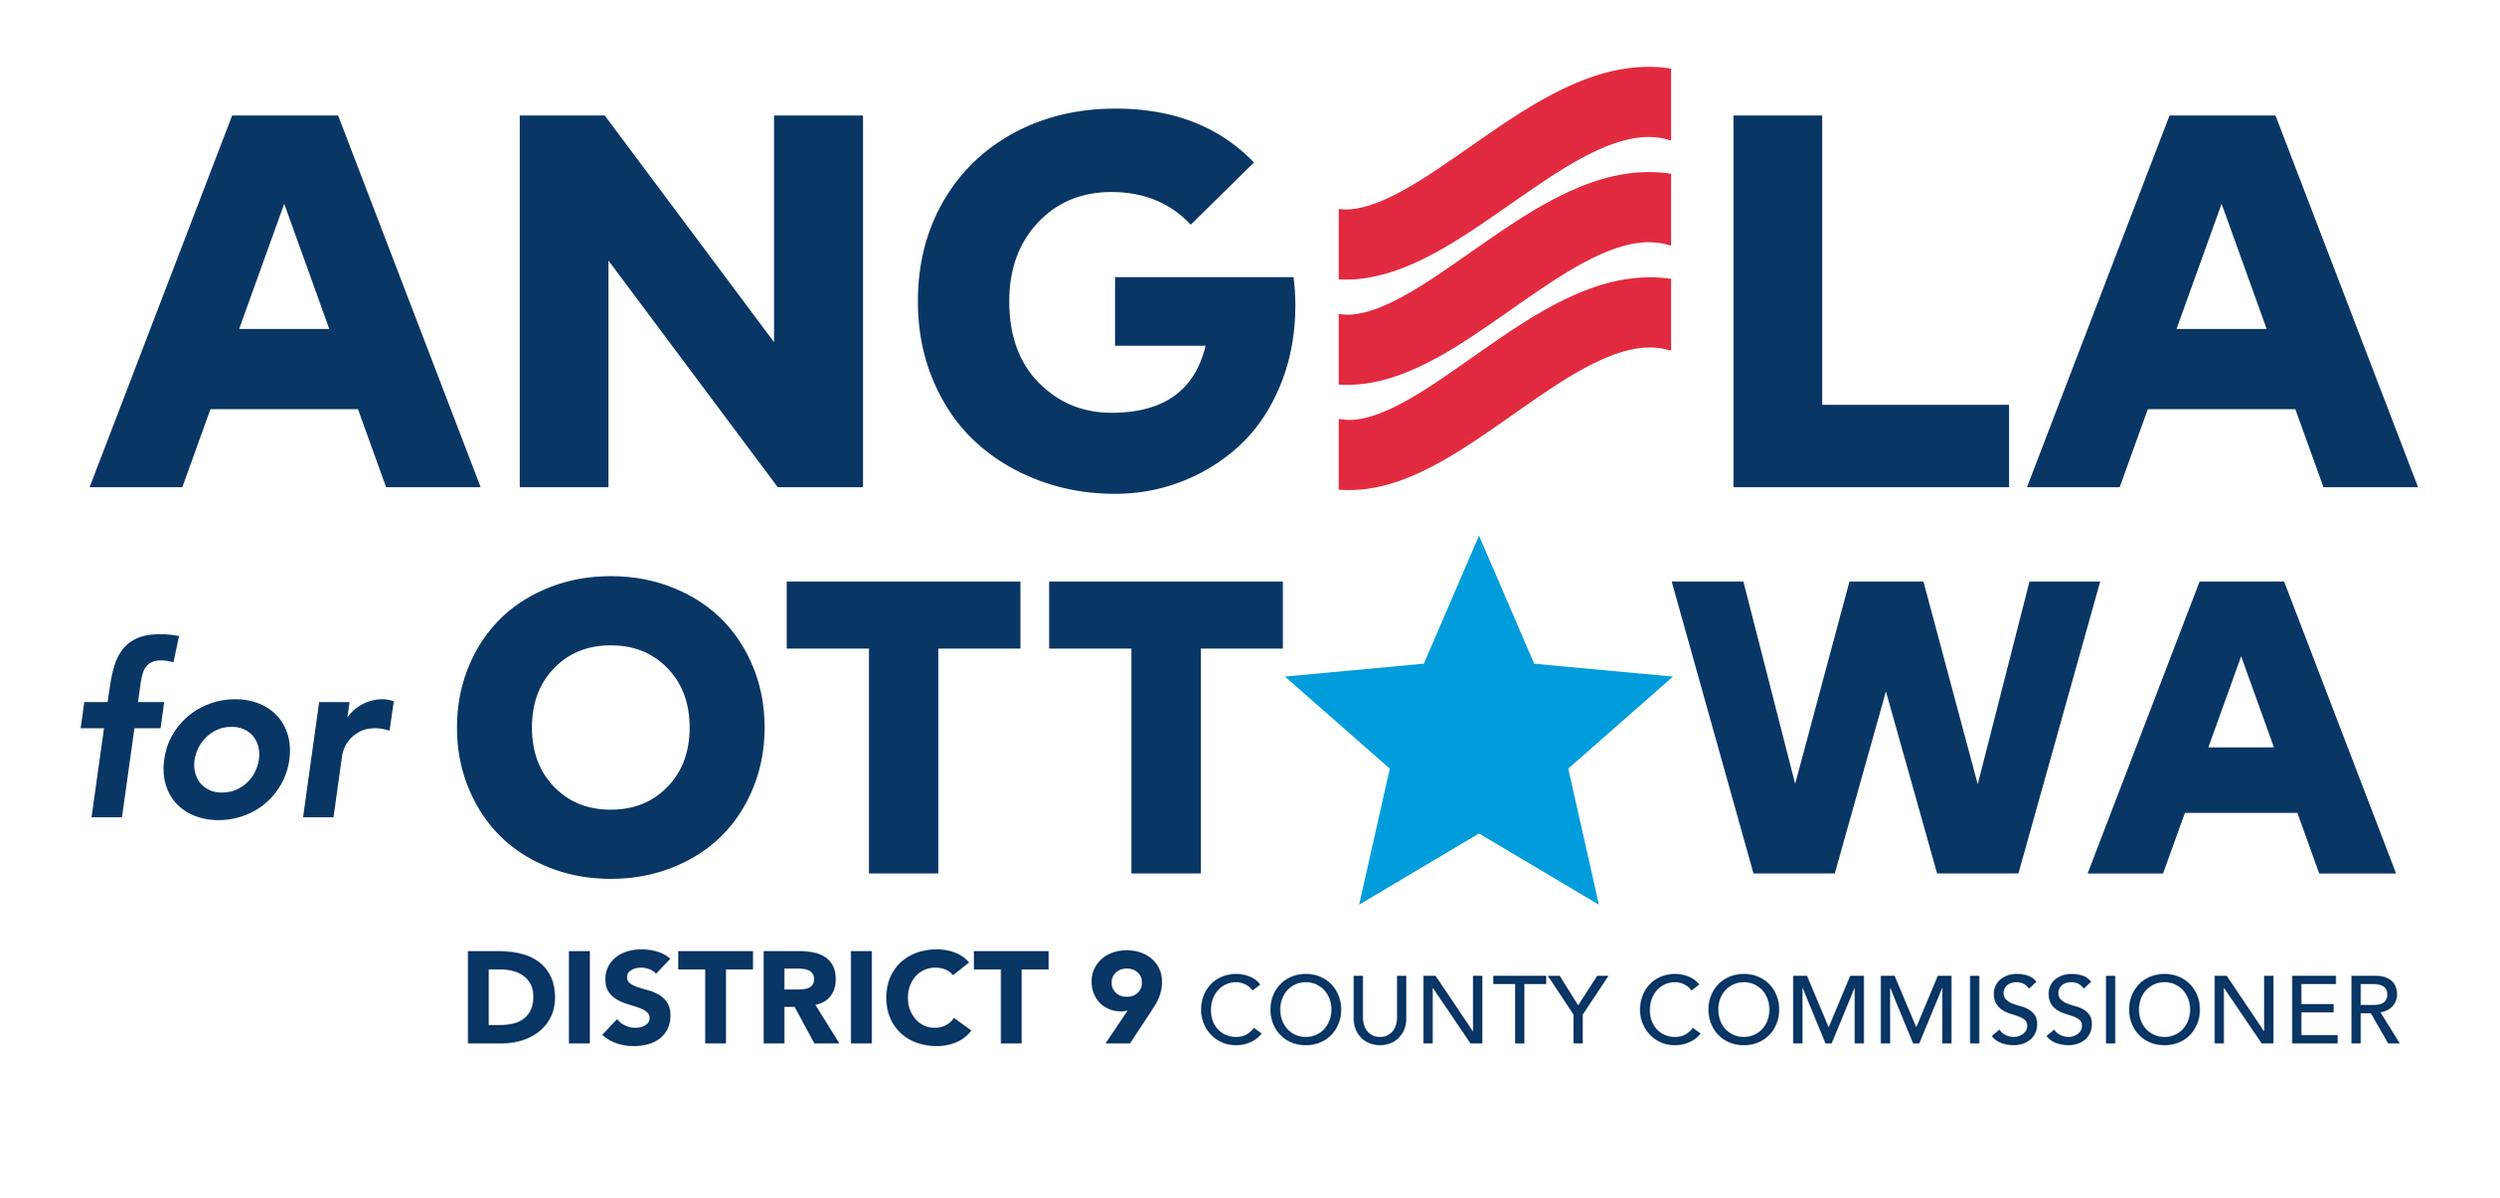 Angela for Ottowa District 9 County Commissioner